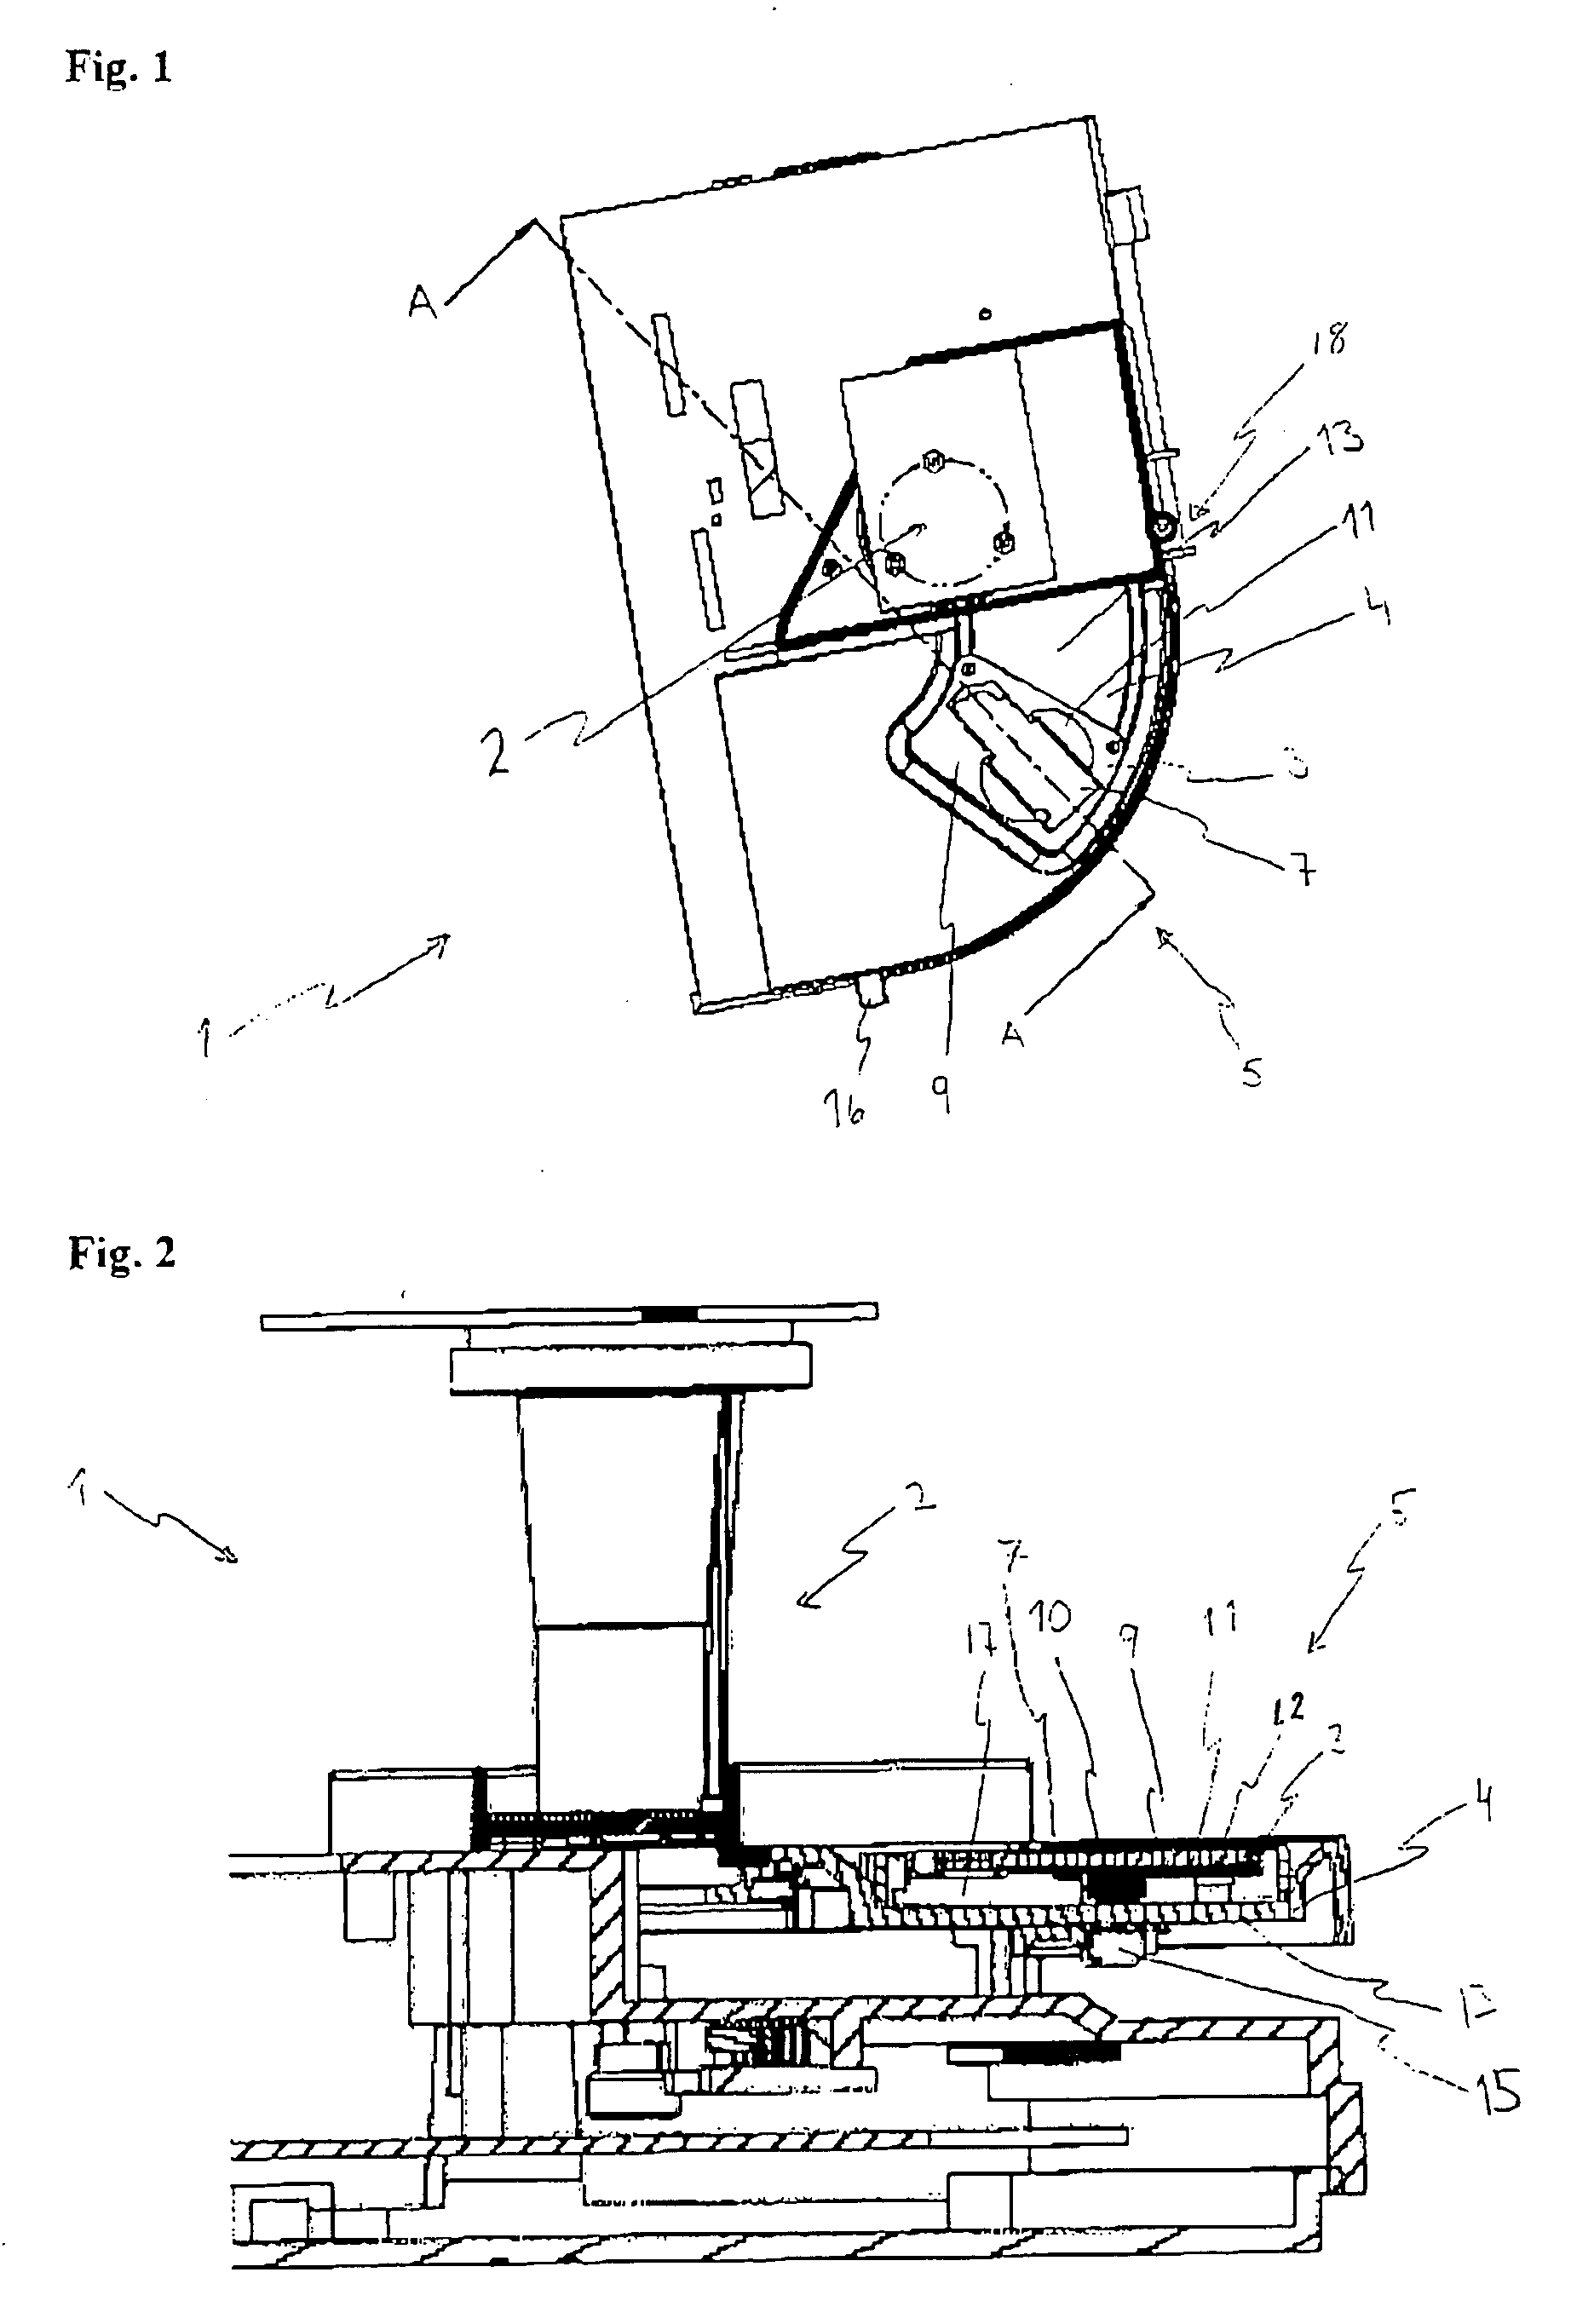 Apparatus for capturing an image